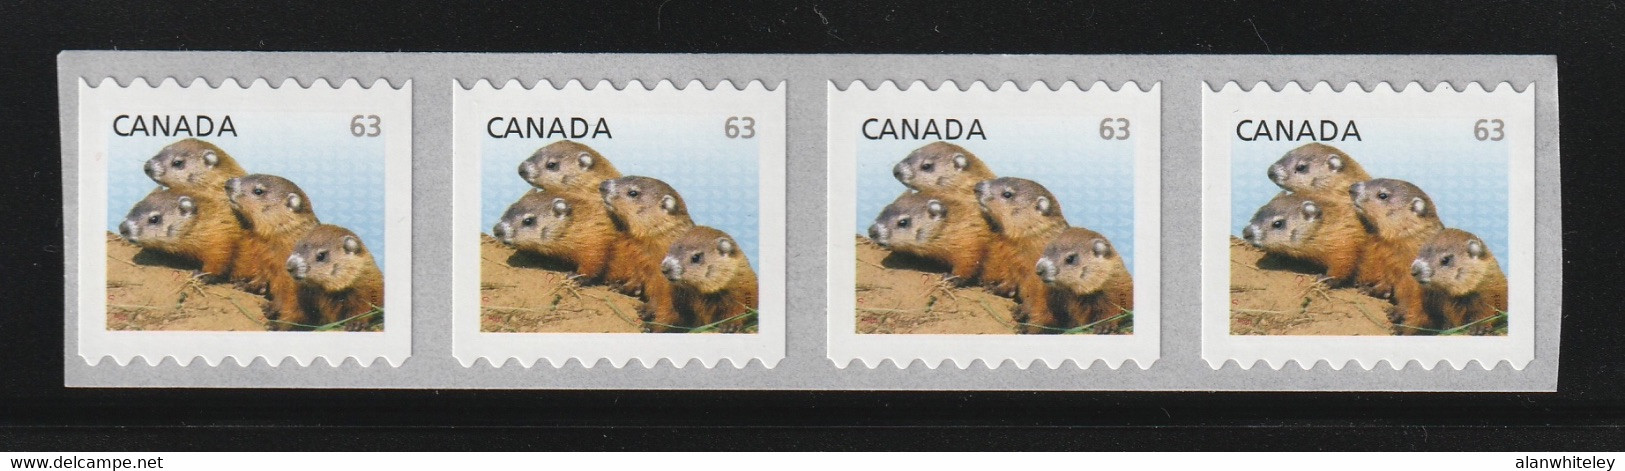 CANADA 2013 Definitives / Young Wildlife / Woodchucks 63c S/ADH: Strip Of 4 Stamps (Sideways) UM/MNH - Roulettes